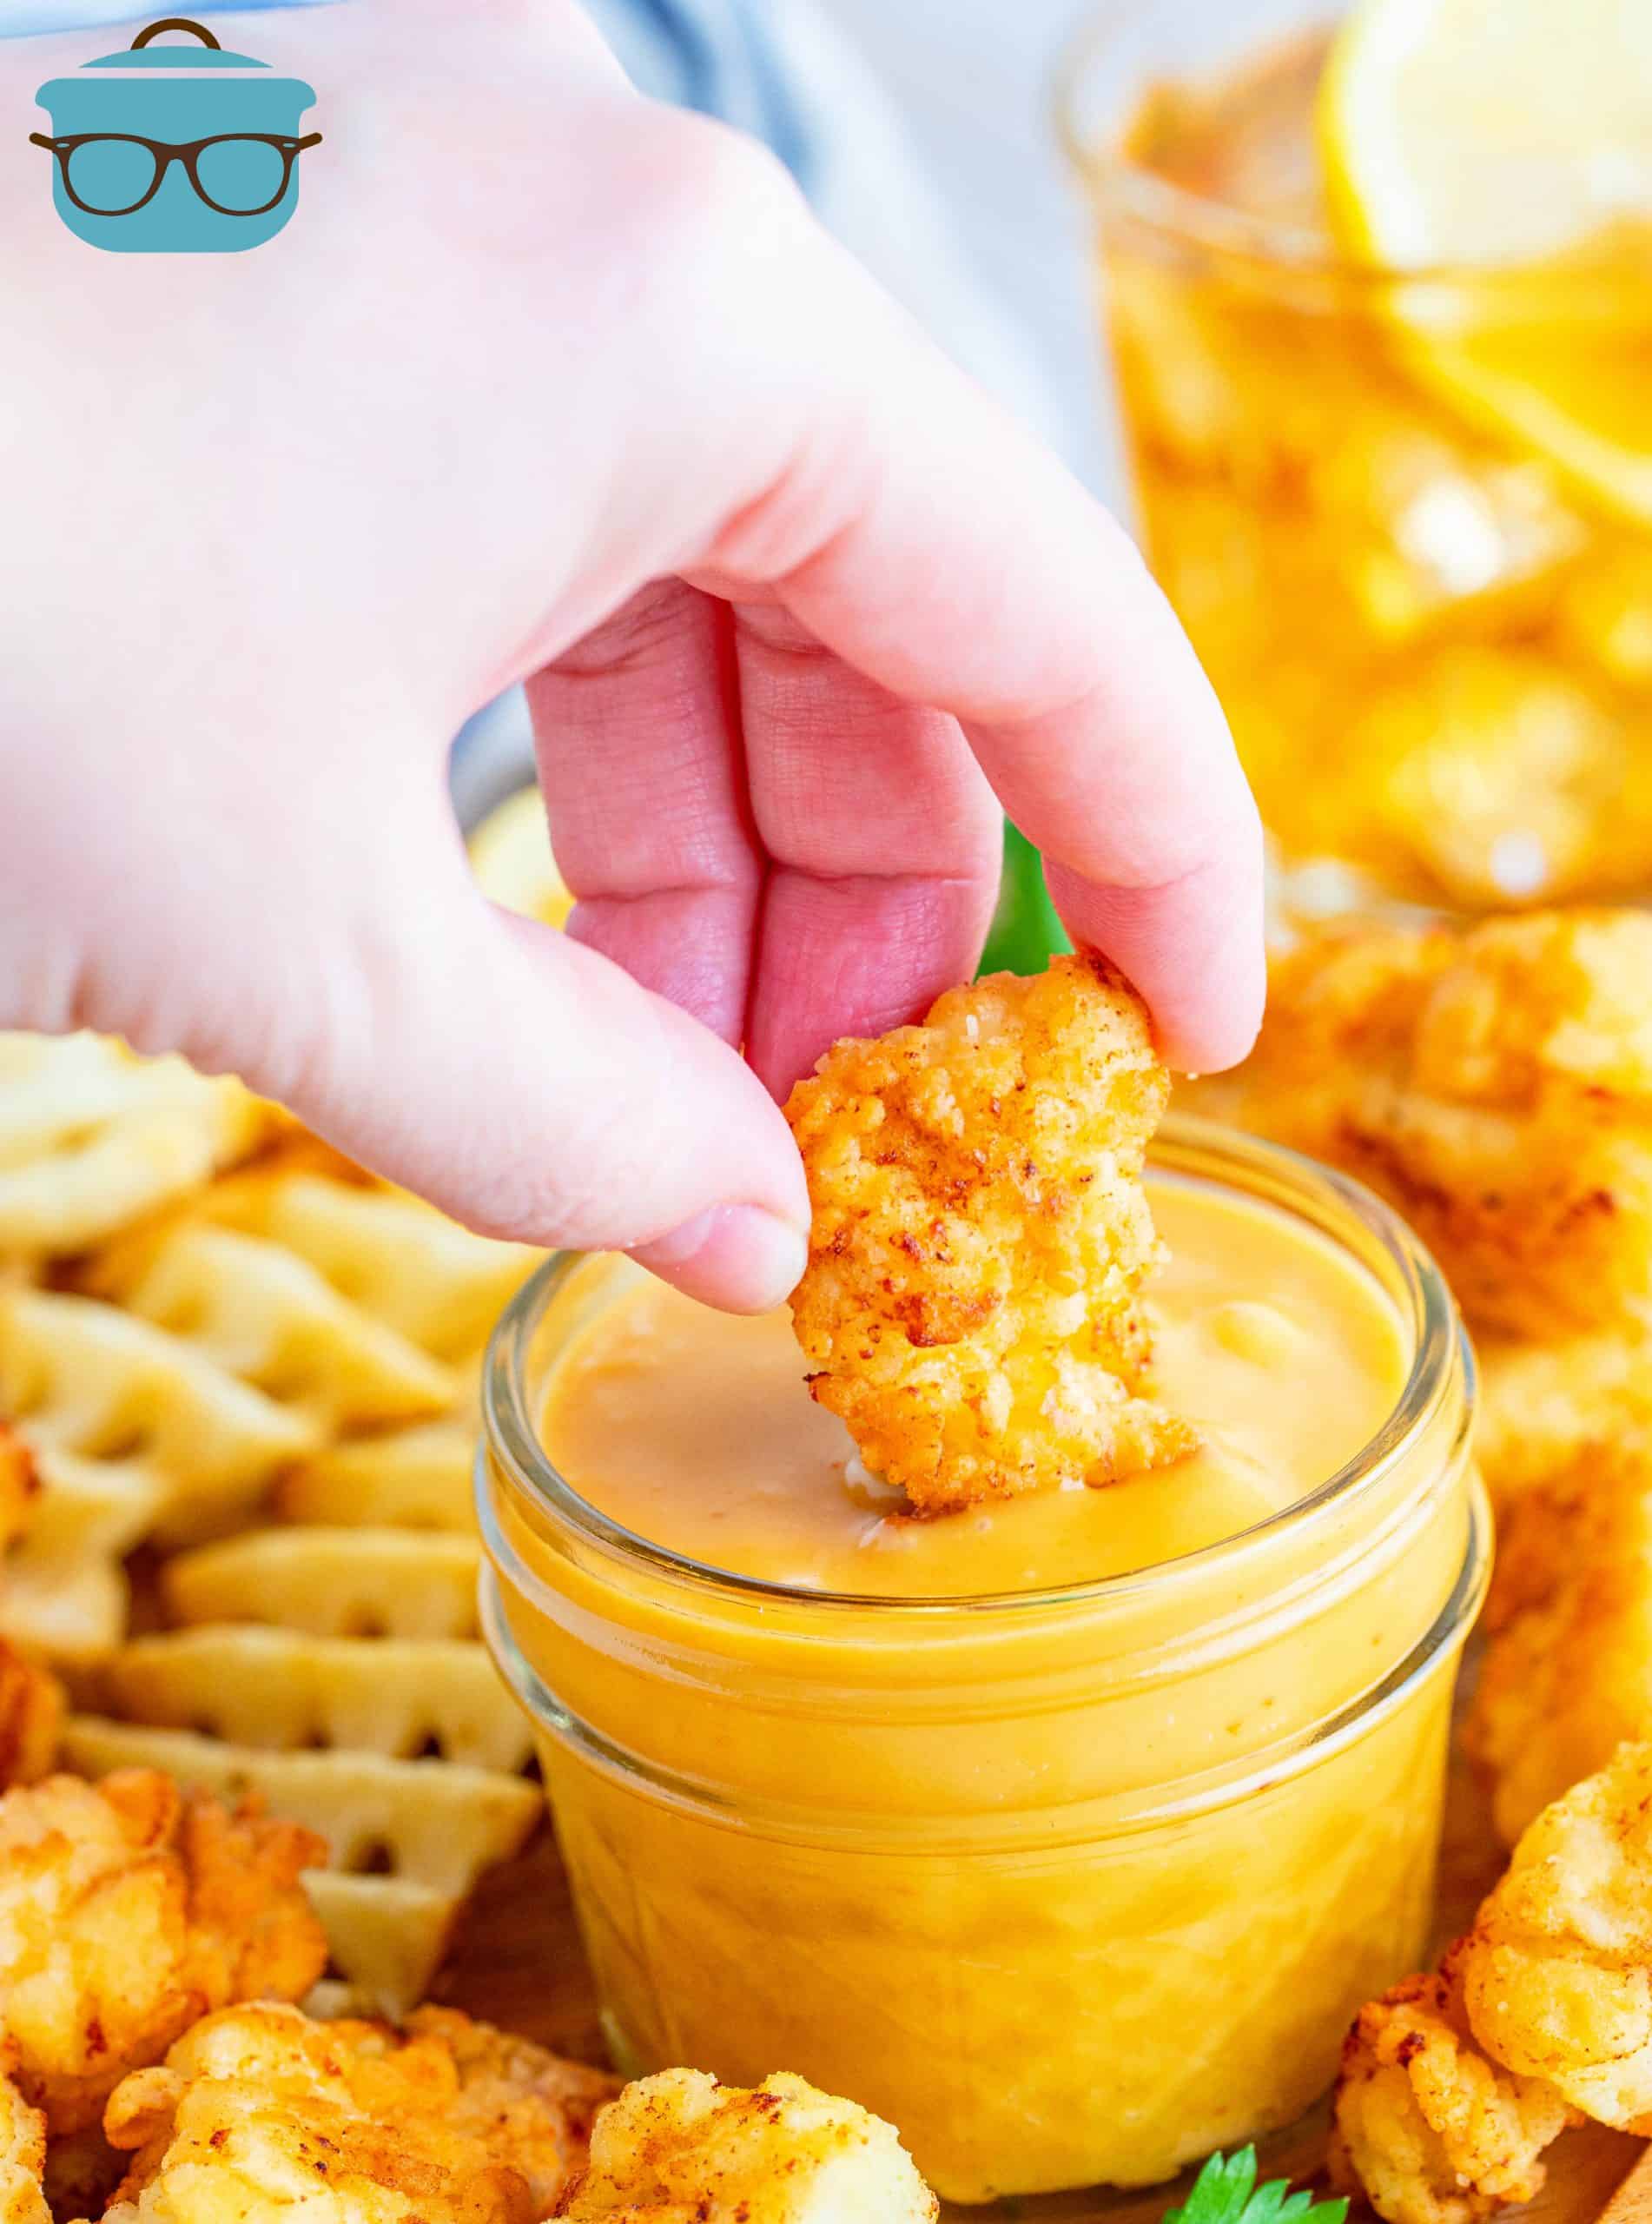 Dipping chicken nuggets into honey mustard sauce.